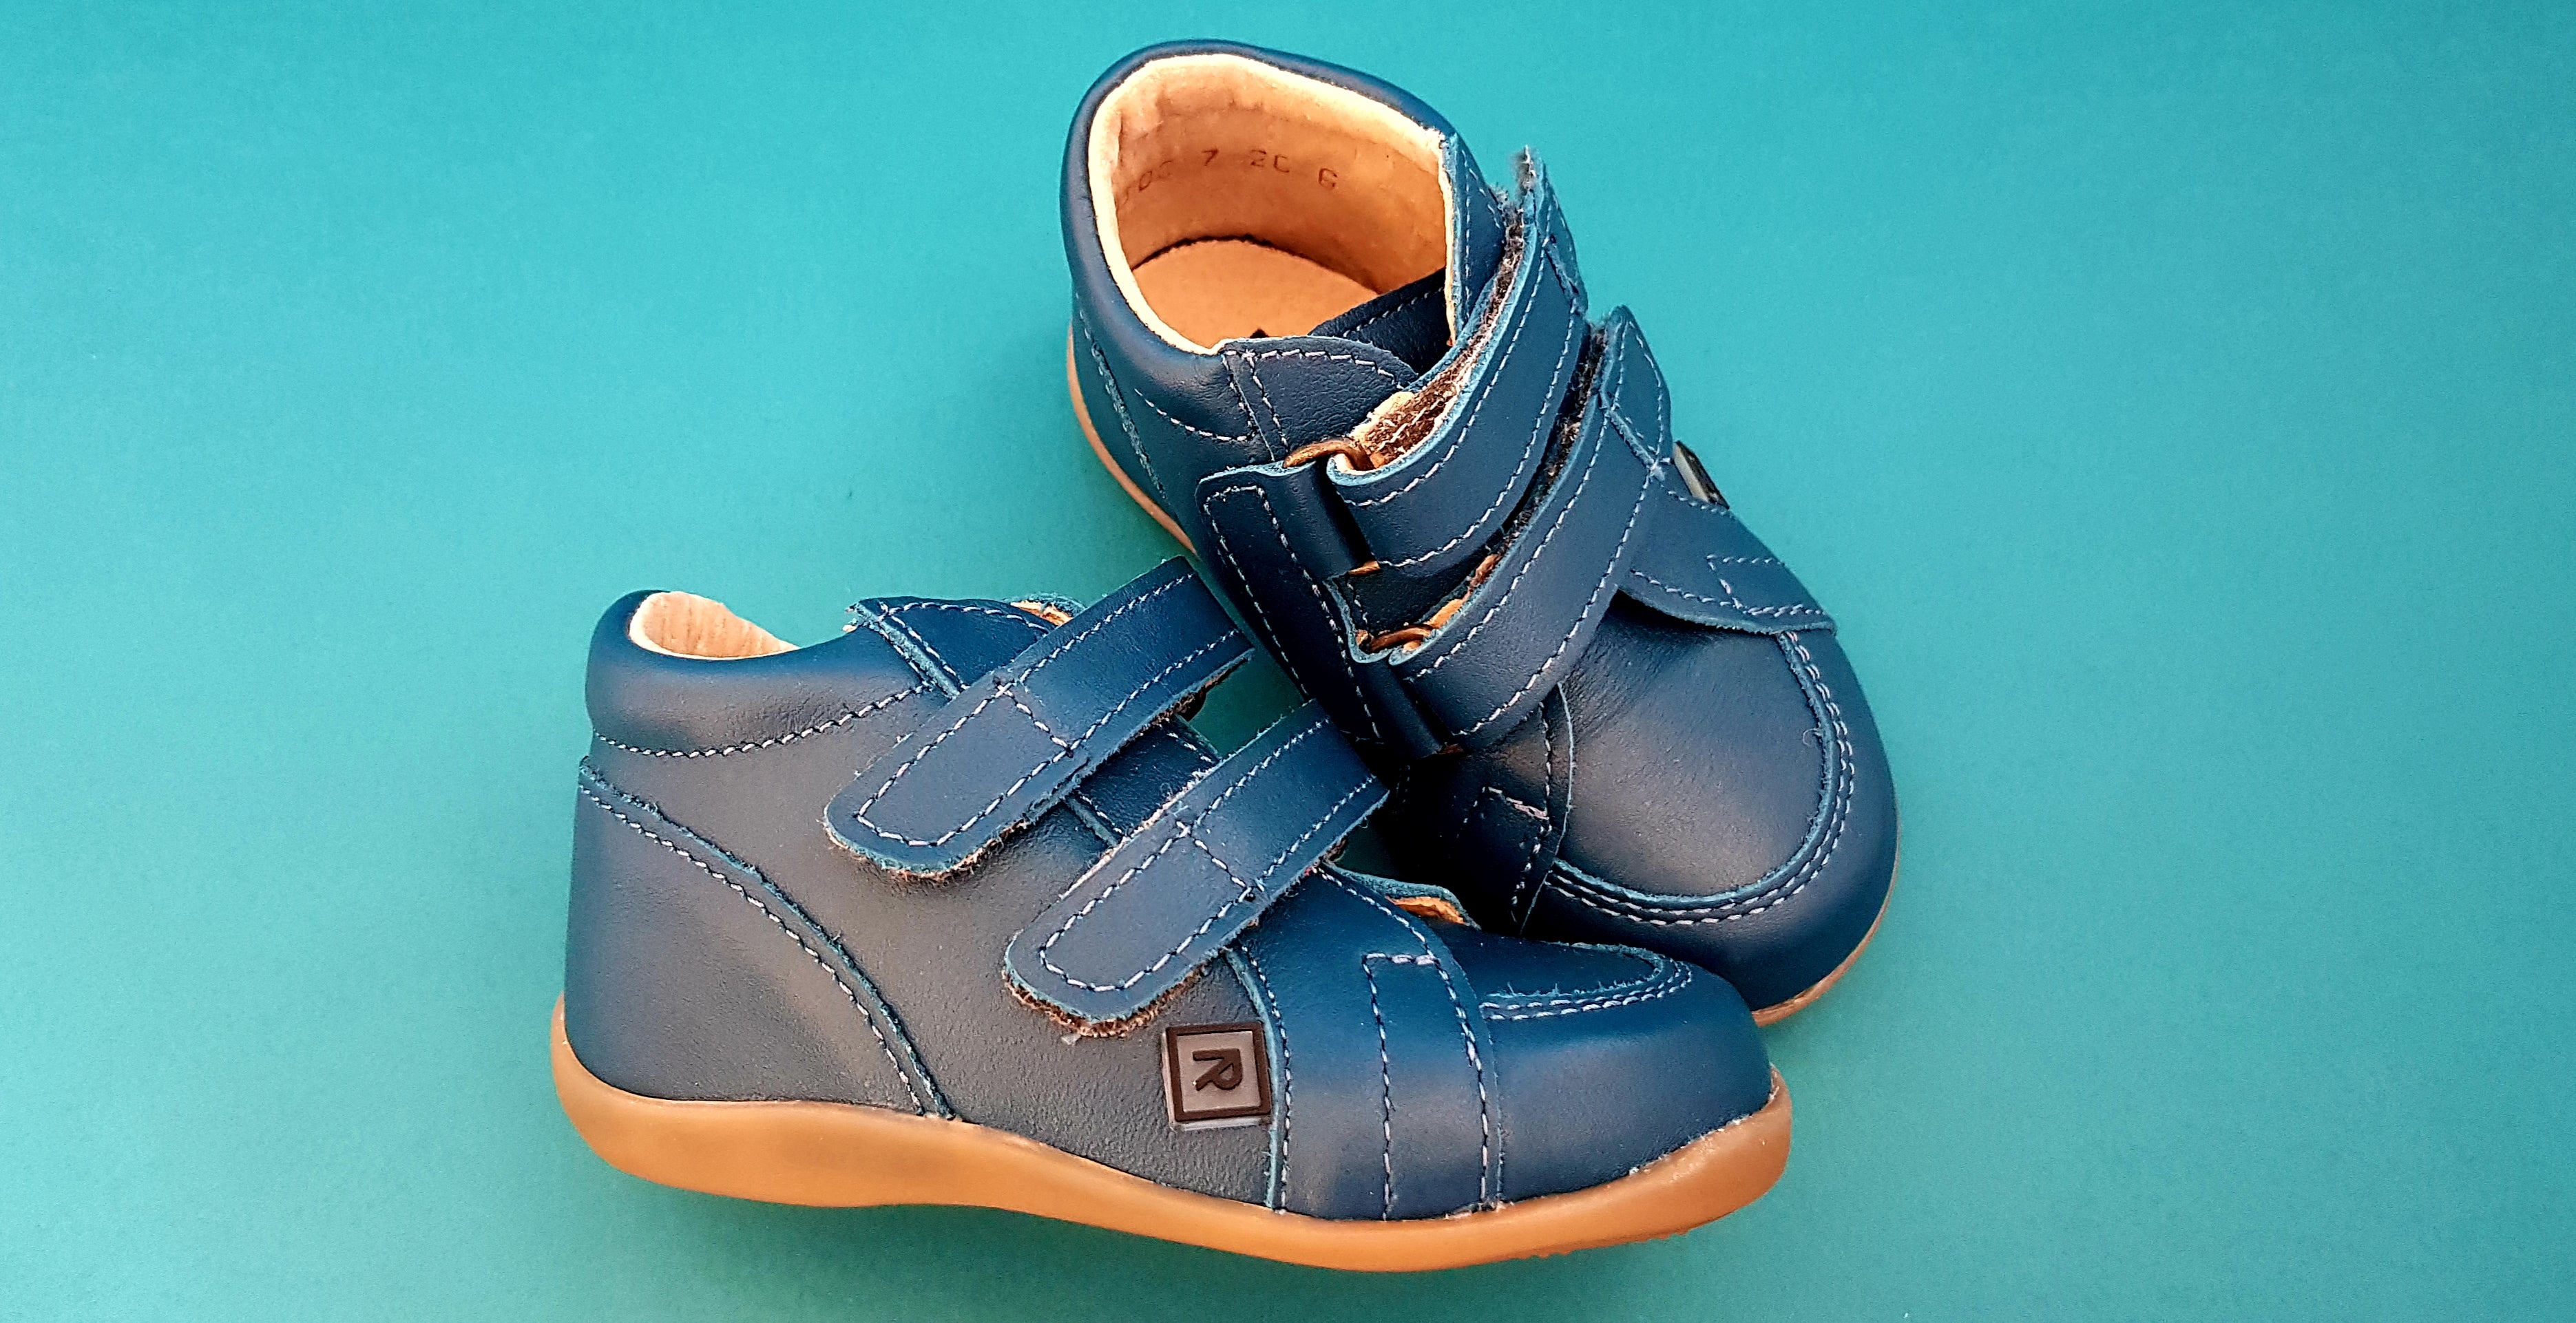 Dark Blue First Walking Shoes for Toddlers made from soft leather with hood-and-loop fastener, seen from top and sideways